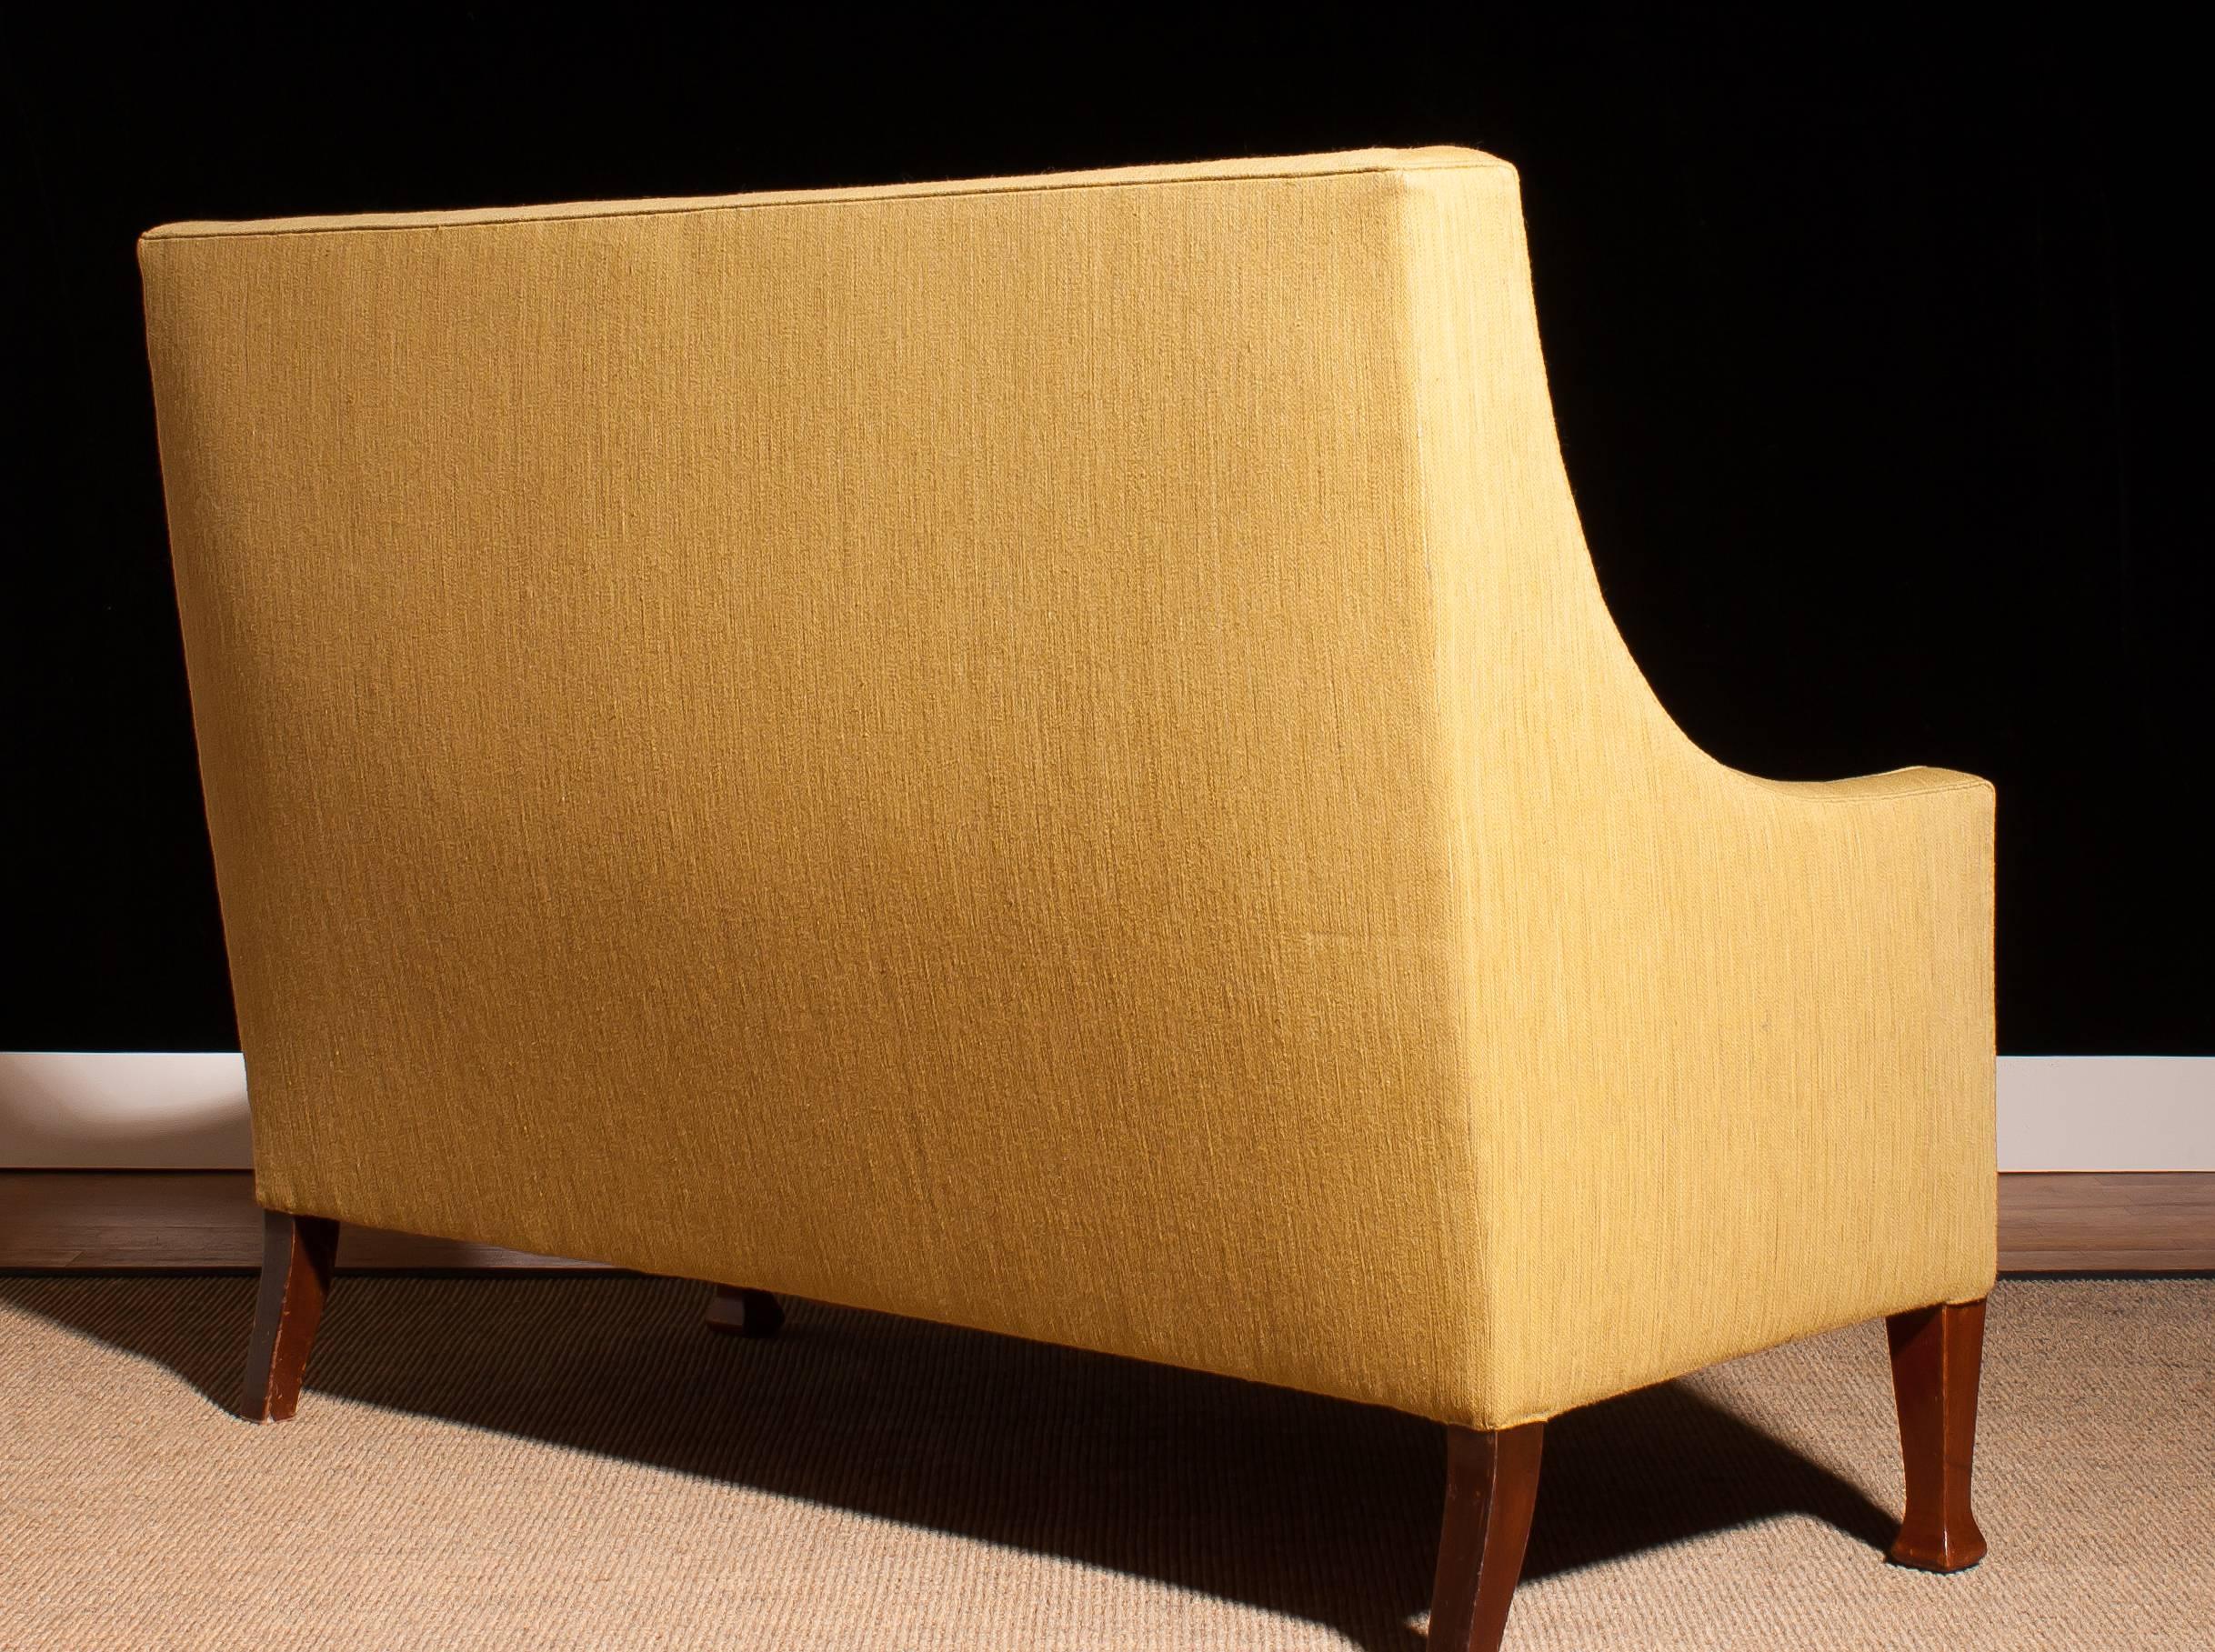 Beautiful high back sofa couch made in Denmark.
The sofa is made of a light yellow fabric on a wooden frame.
It is in a wonderful original condition.
Period 1950s.
Dimensions: H 108 cm, W 148 cm, D 75 cm, SH 46 cm.